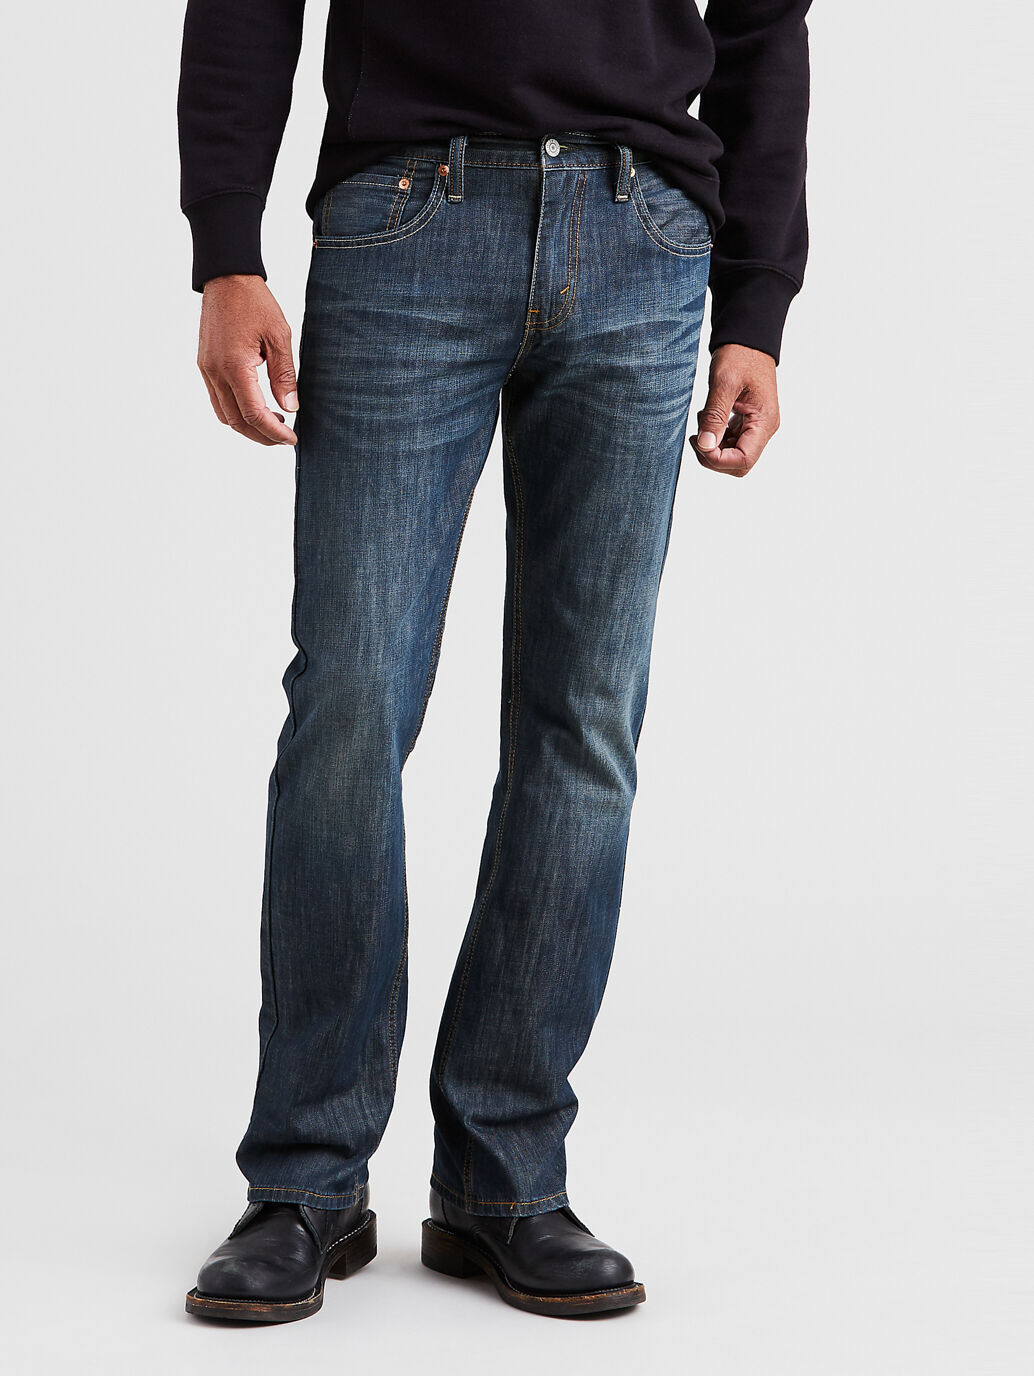 527™ Slim Bootcut Jeans in Andi